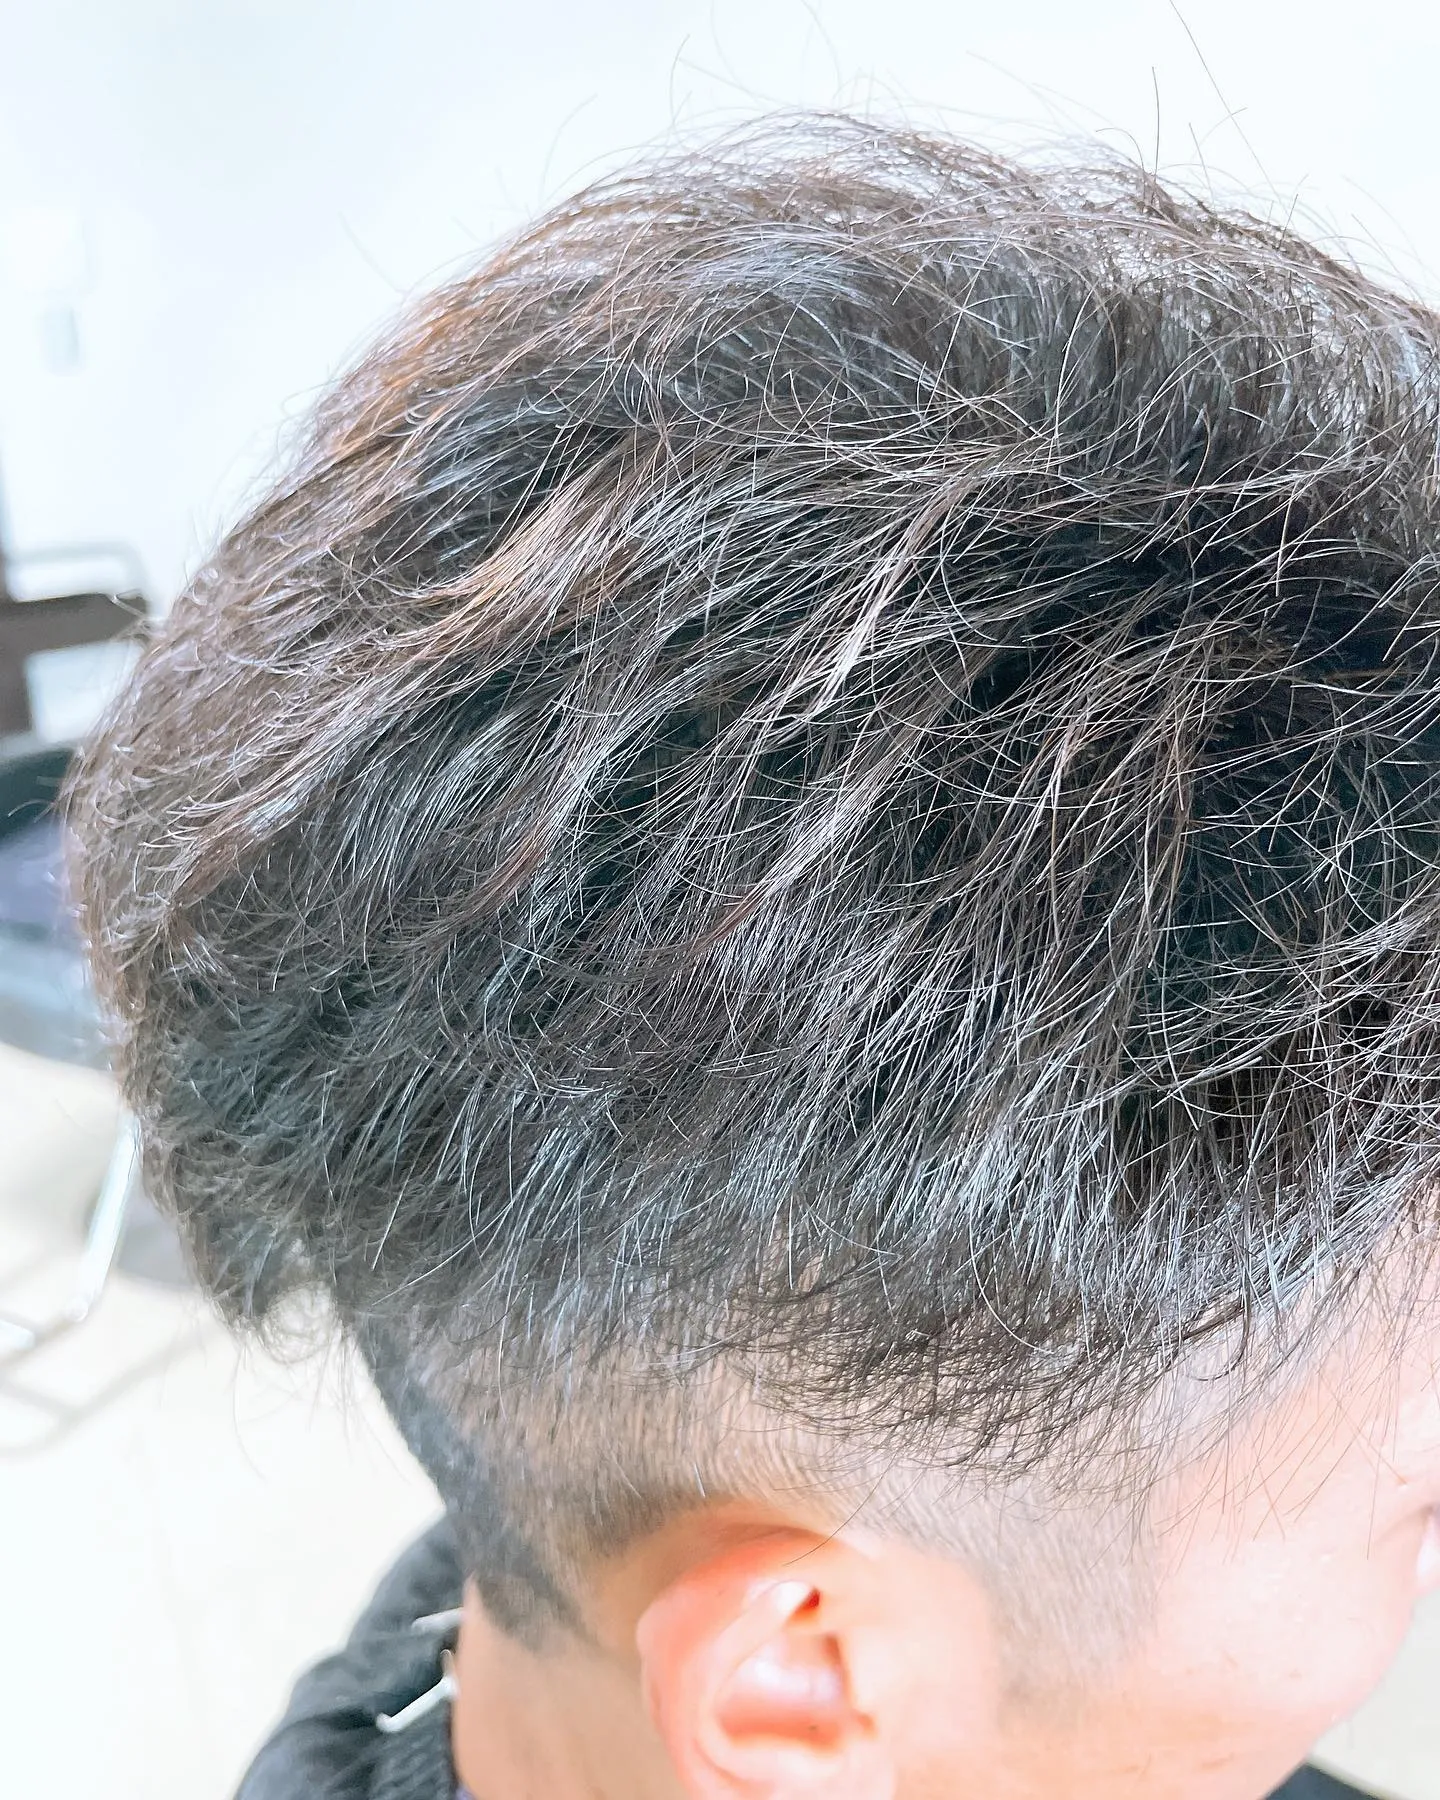 e.h. to Next /木津川市美容室メンズヘアサロン